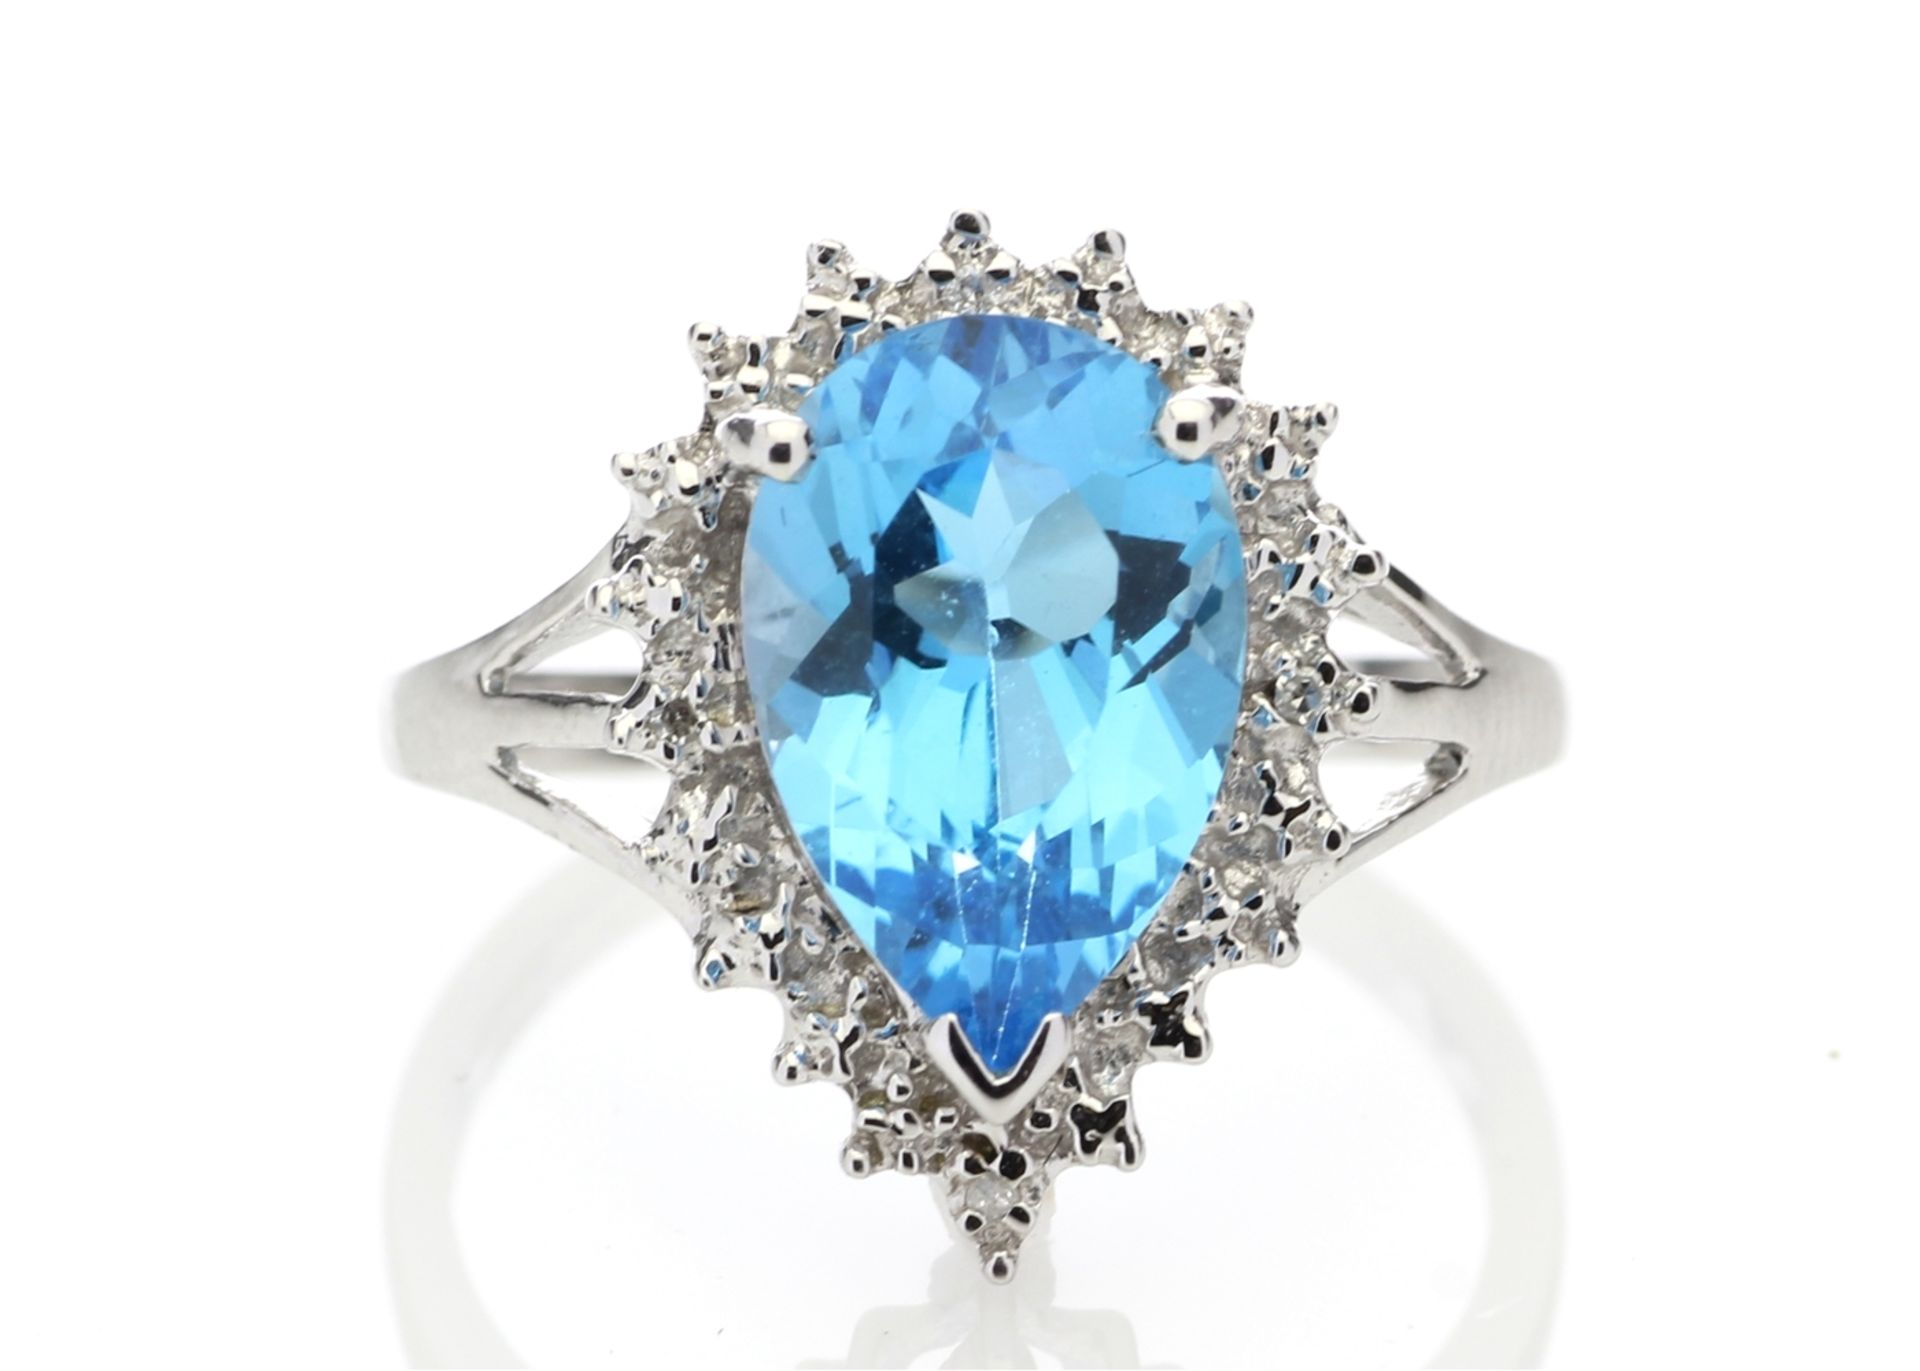 9ct White Gold Diamond And Blue Topaz Ring 0.01 Carats - Valued by AGI £1,045.00 - A stunning pear